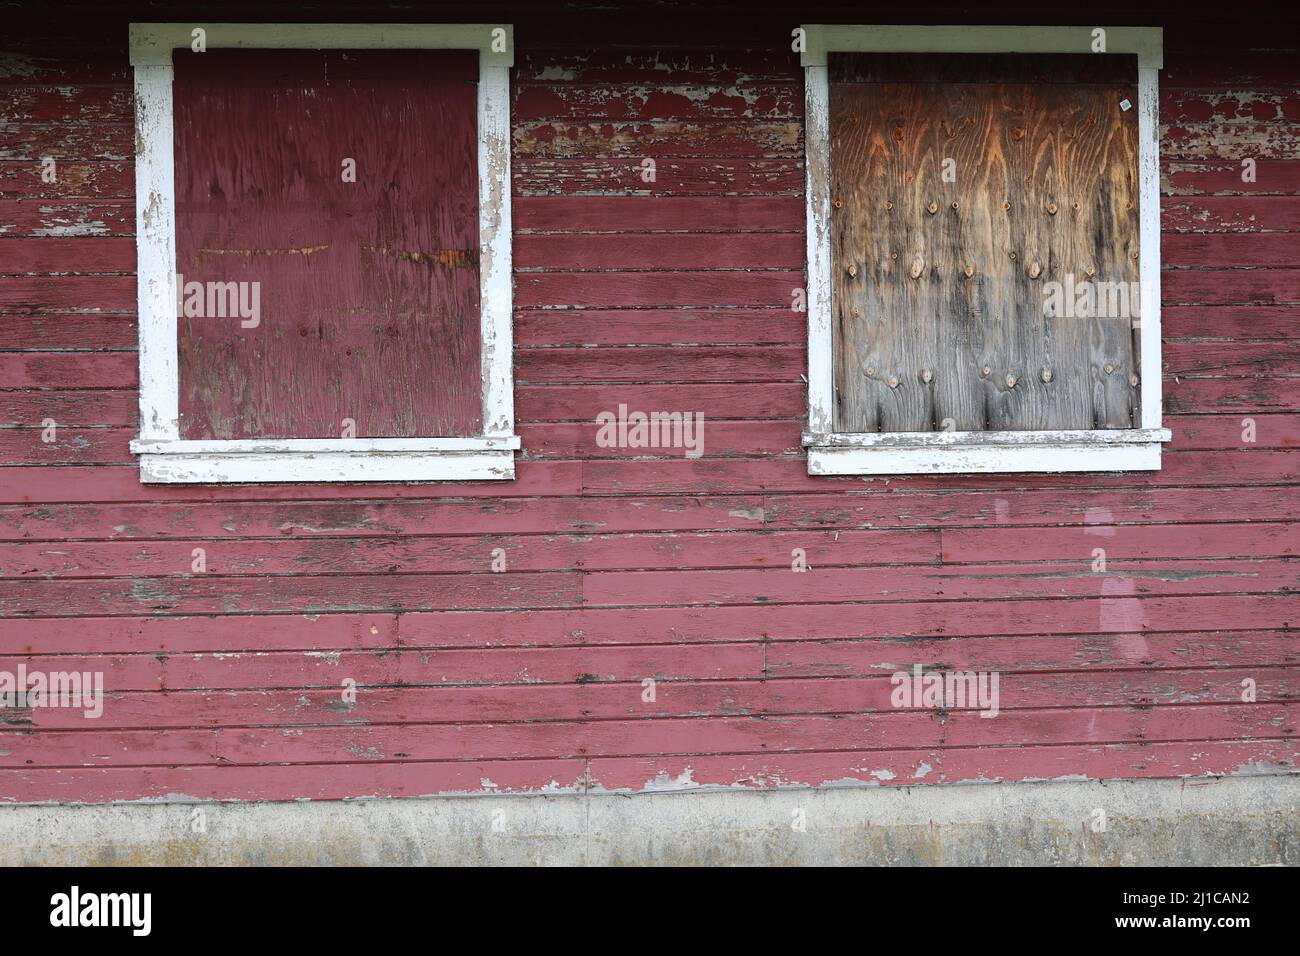 Lovely barn wall, old and decaying Stock Photo